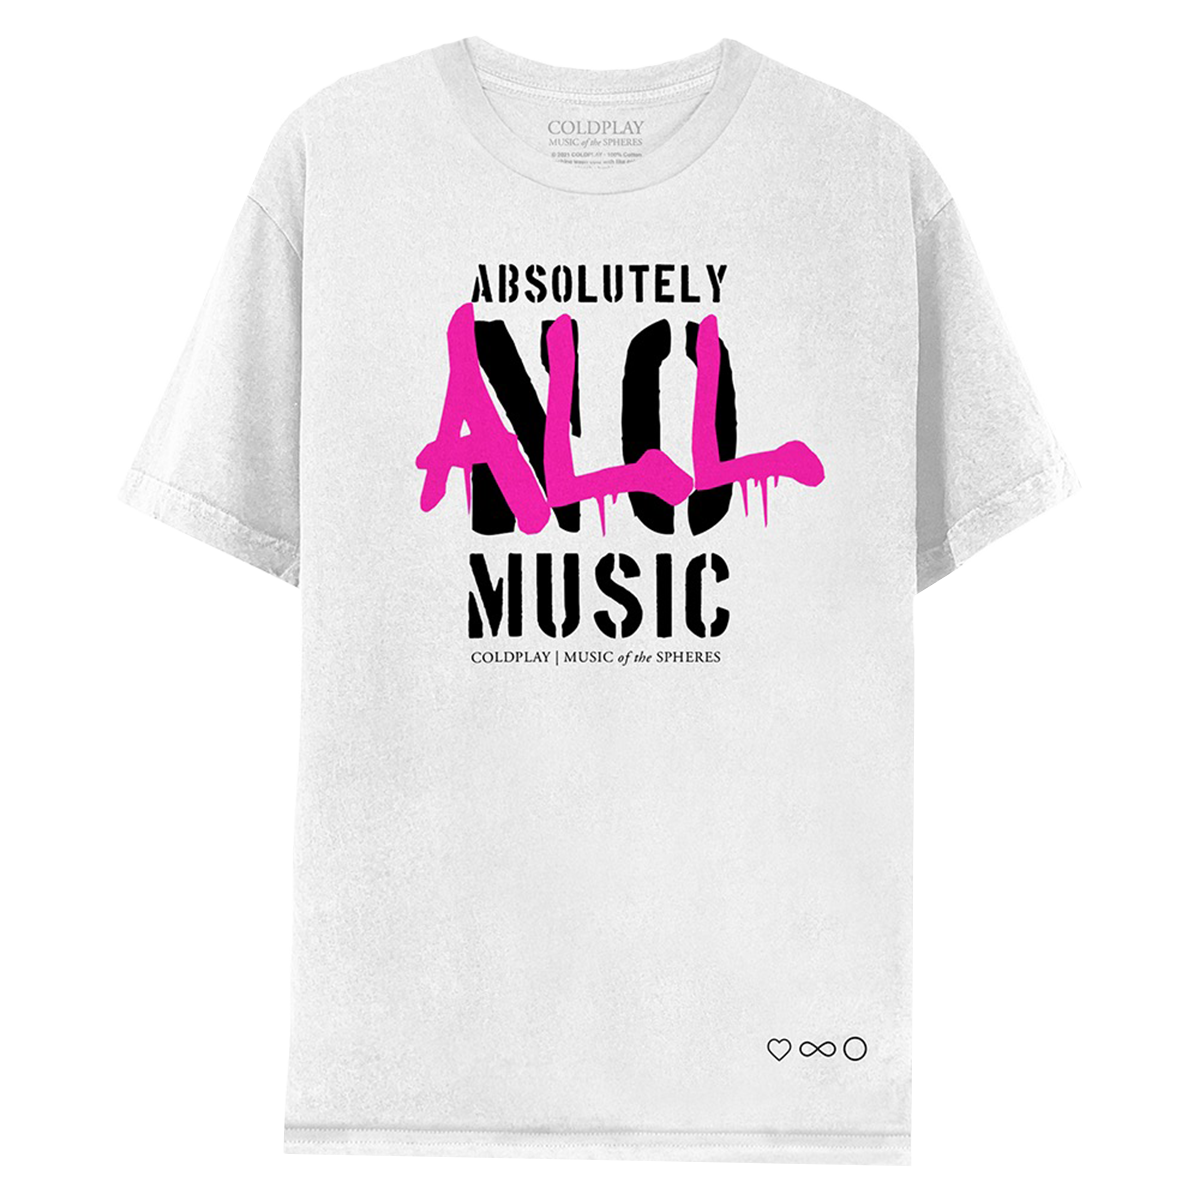 Absolutely All Music Tee